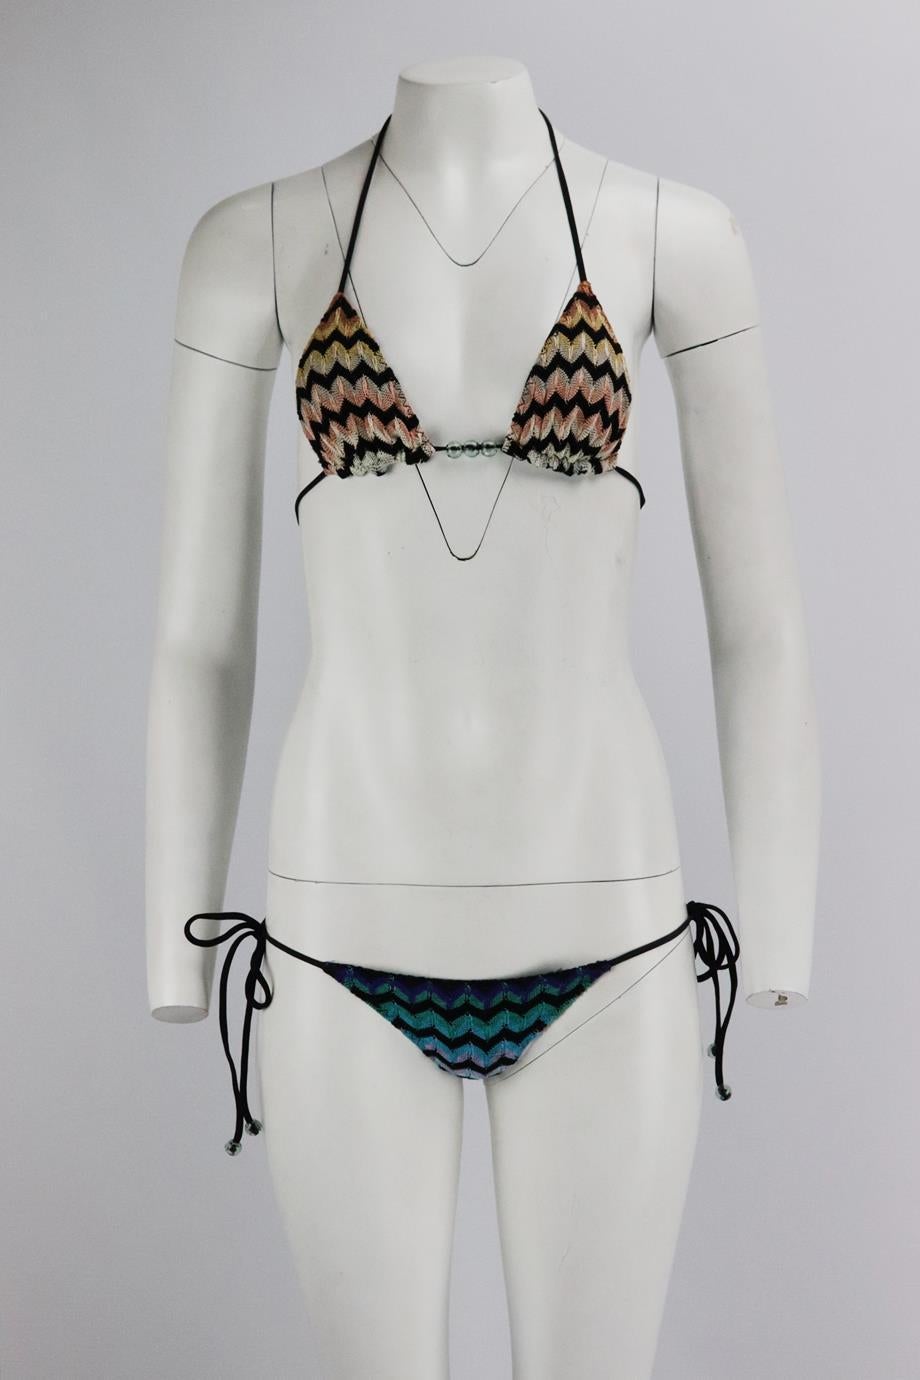 Missoni Mare crochet knit halterneck triangle bikini. Black, blue, green, cream, peach and sand. Tie fastening at back and side. 86% Rayon, 7% wool, 7% cotton. Comes with matching dustbag. Size: IT 40 (UK 8, US 4, FR 36) Very good condition - Worn